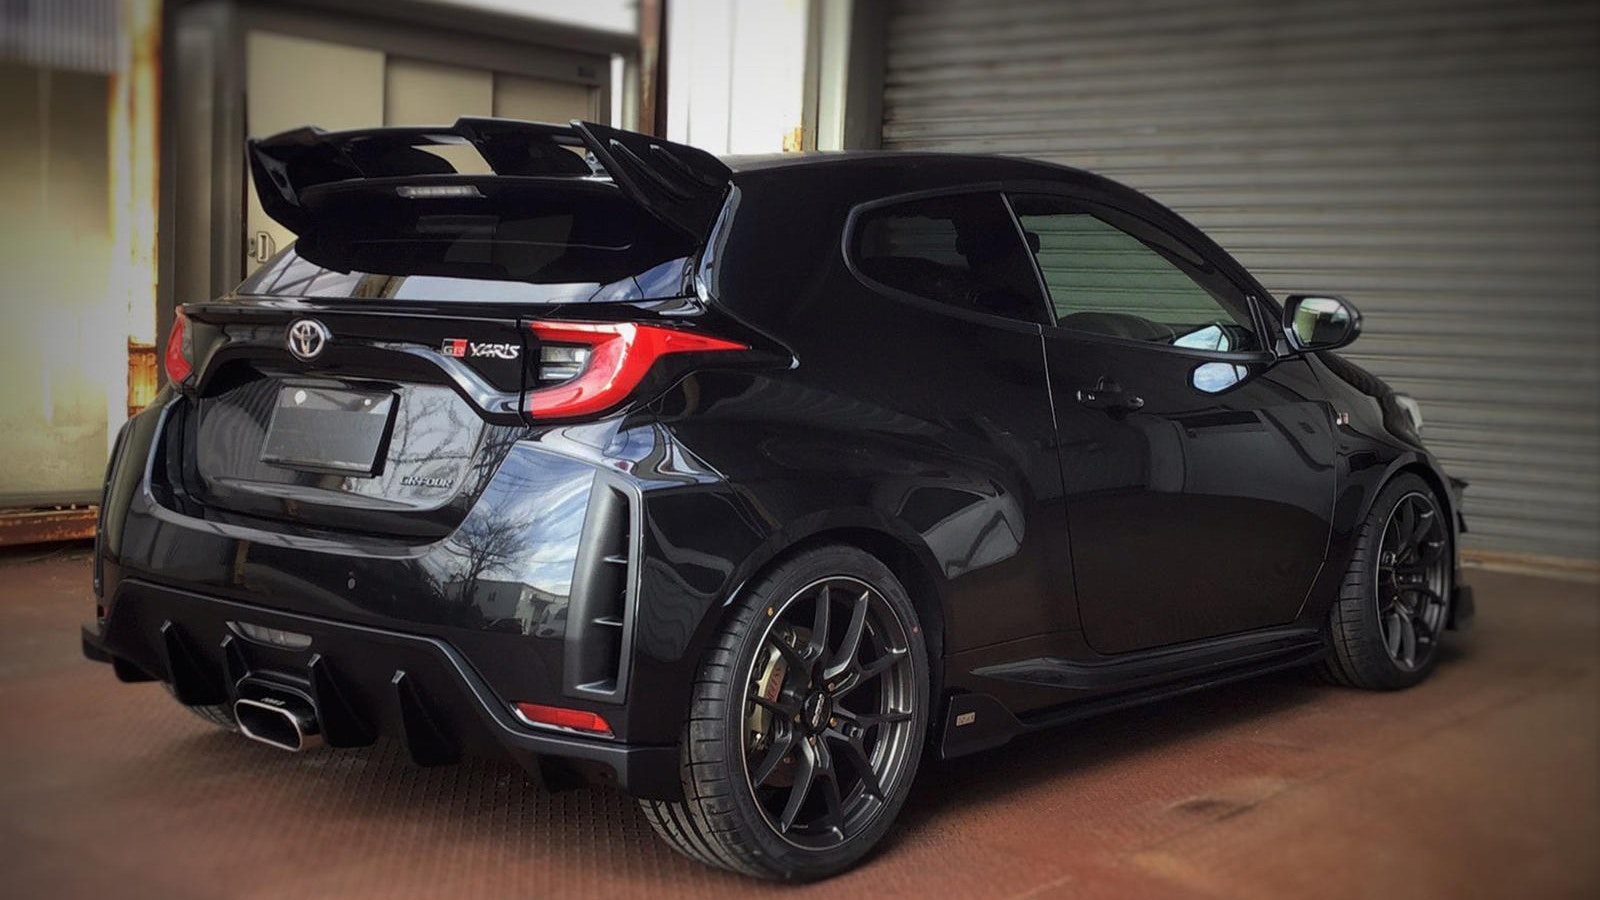 GR Yaris looks ready to scare off the competition with sharp TOM'